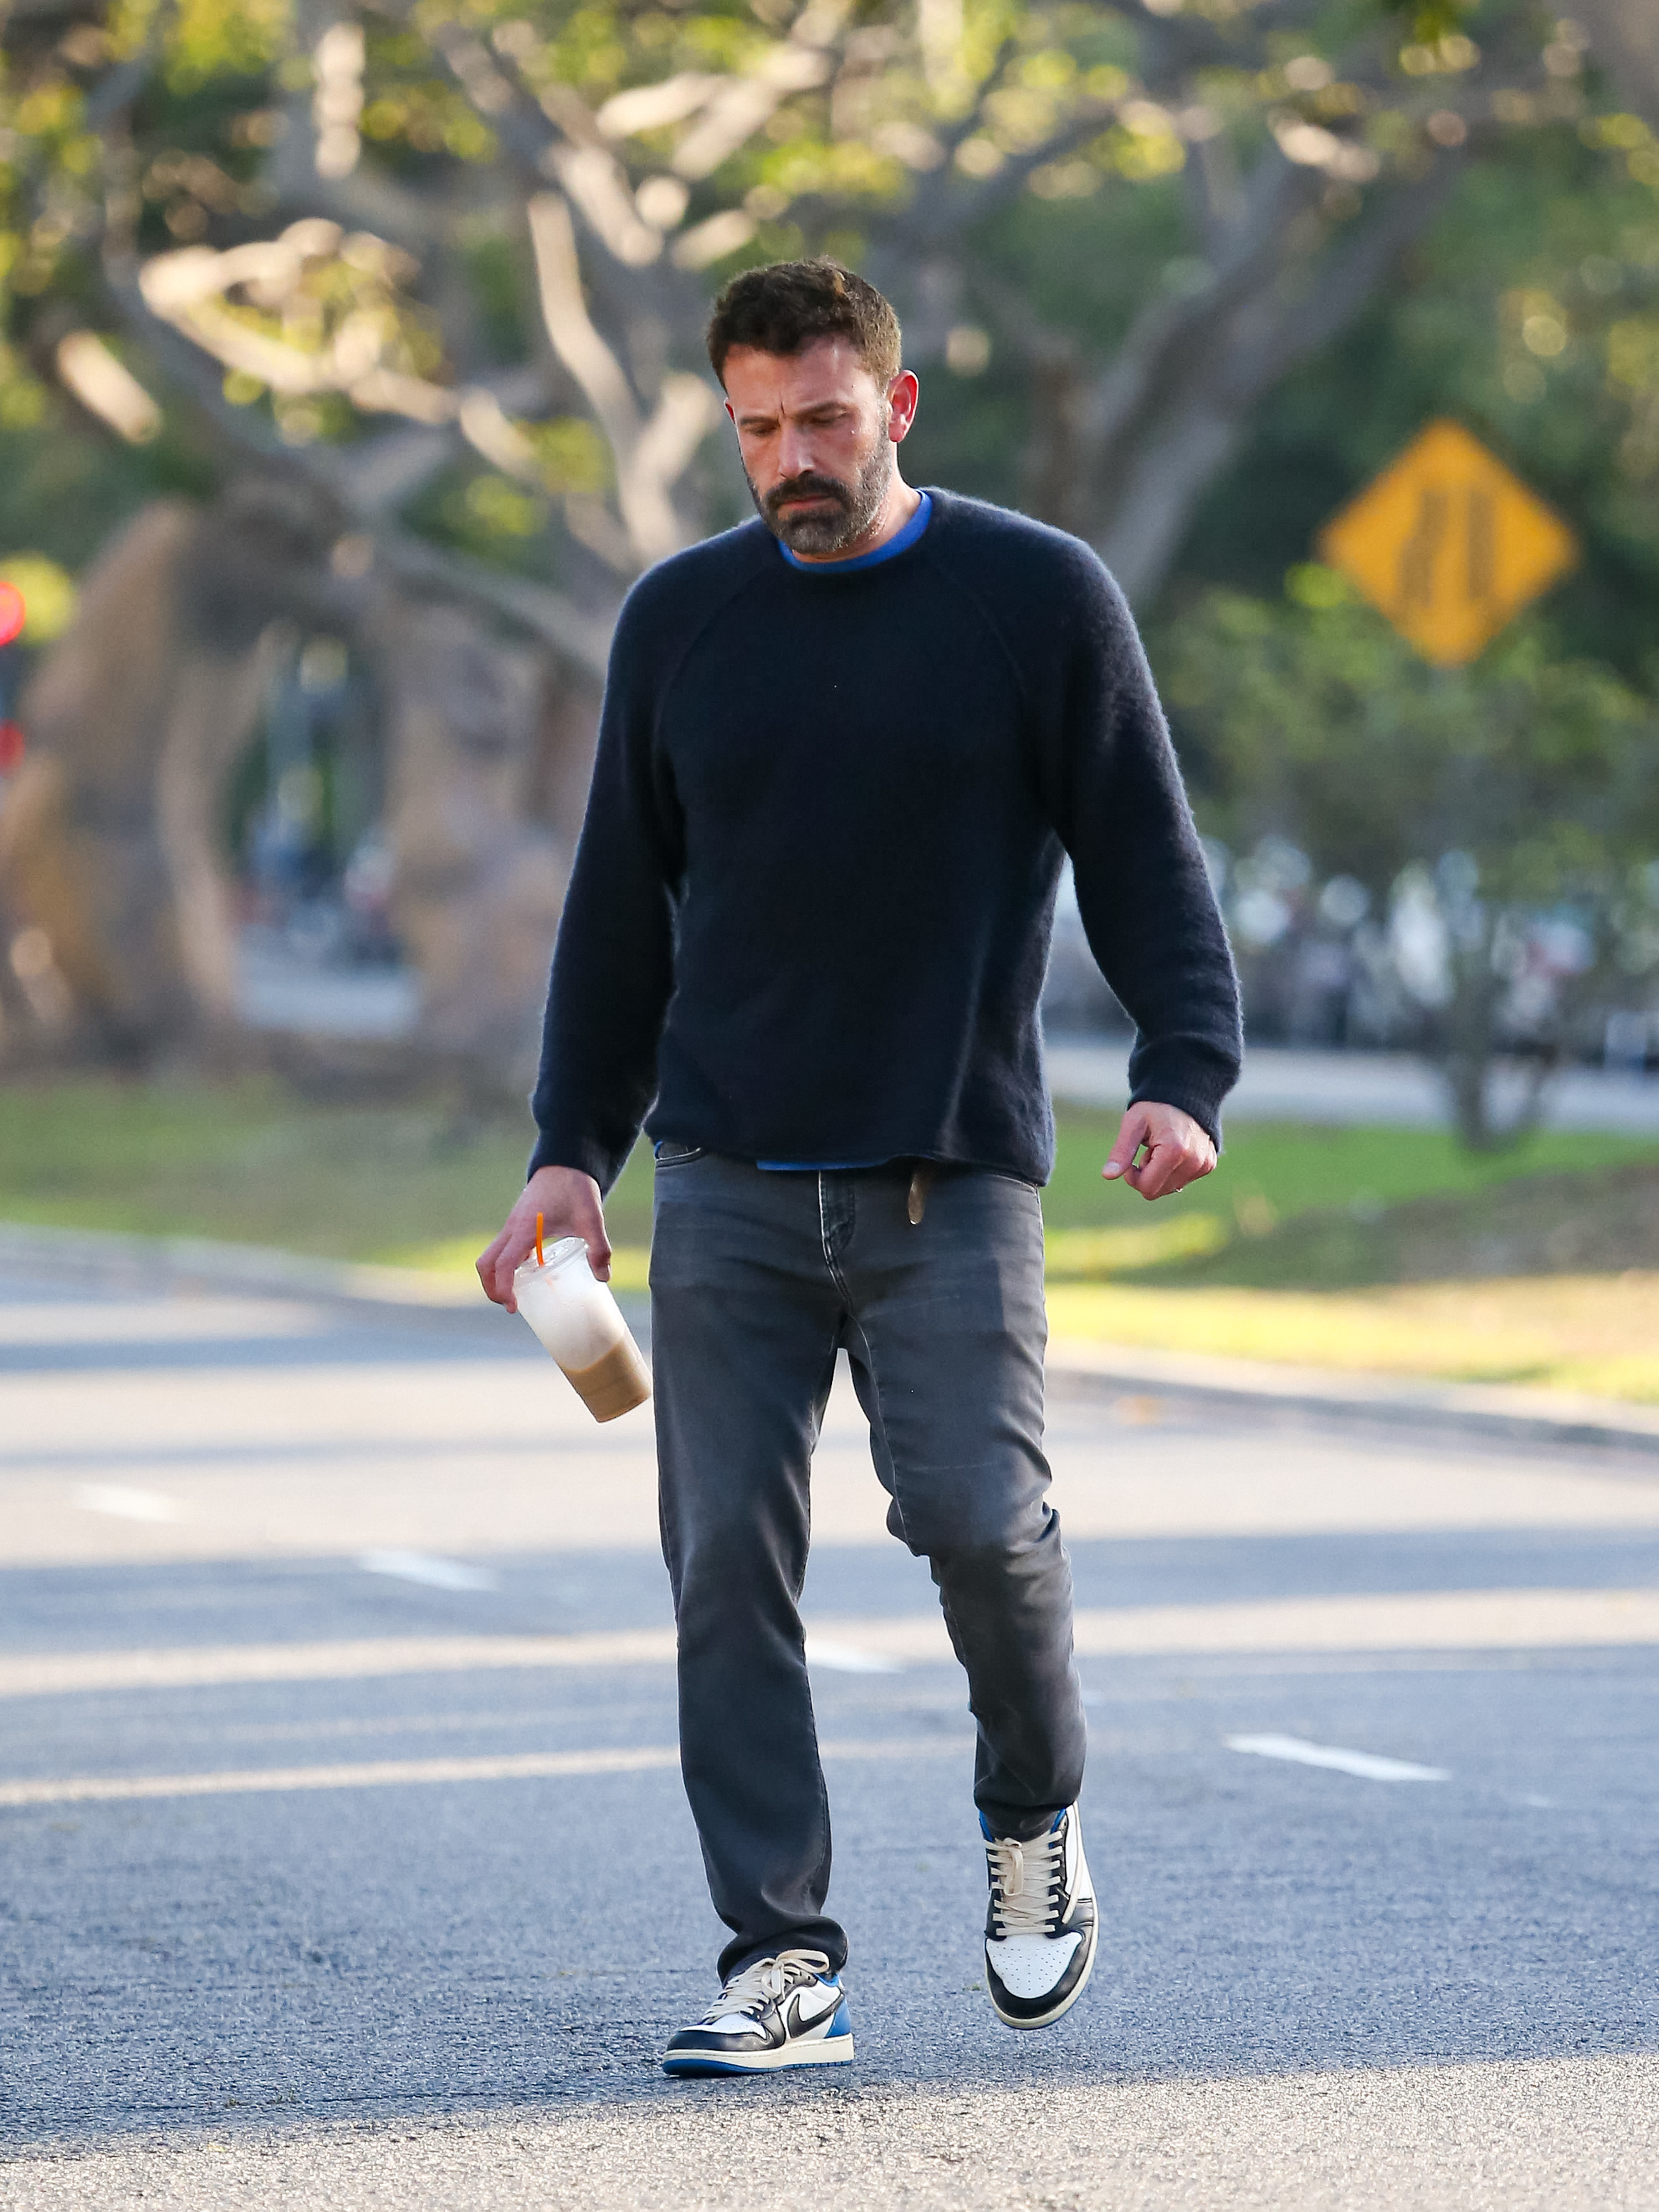 he&#x27;s looking down while he walks and holds an almost empty iced coffee